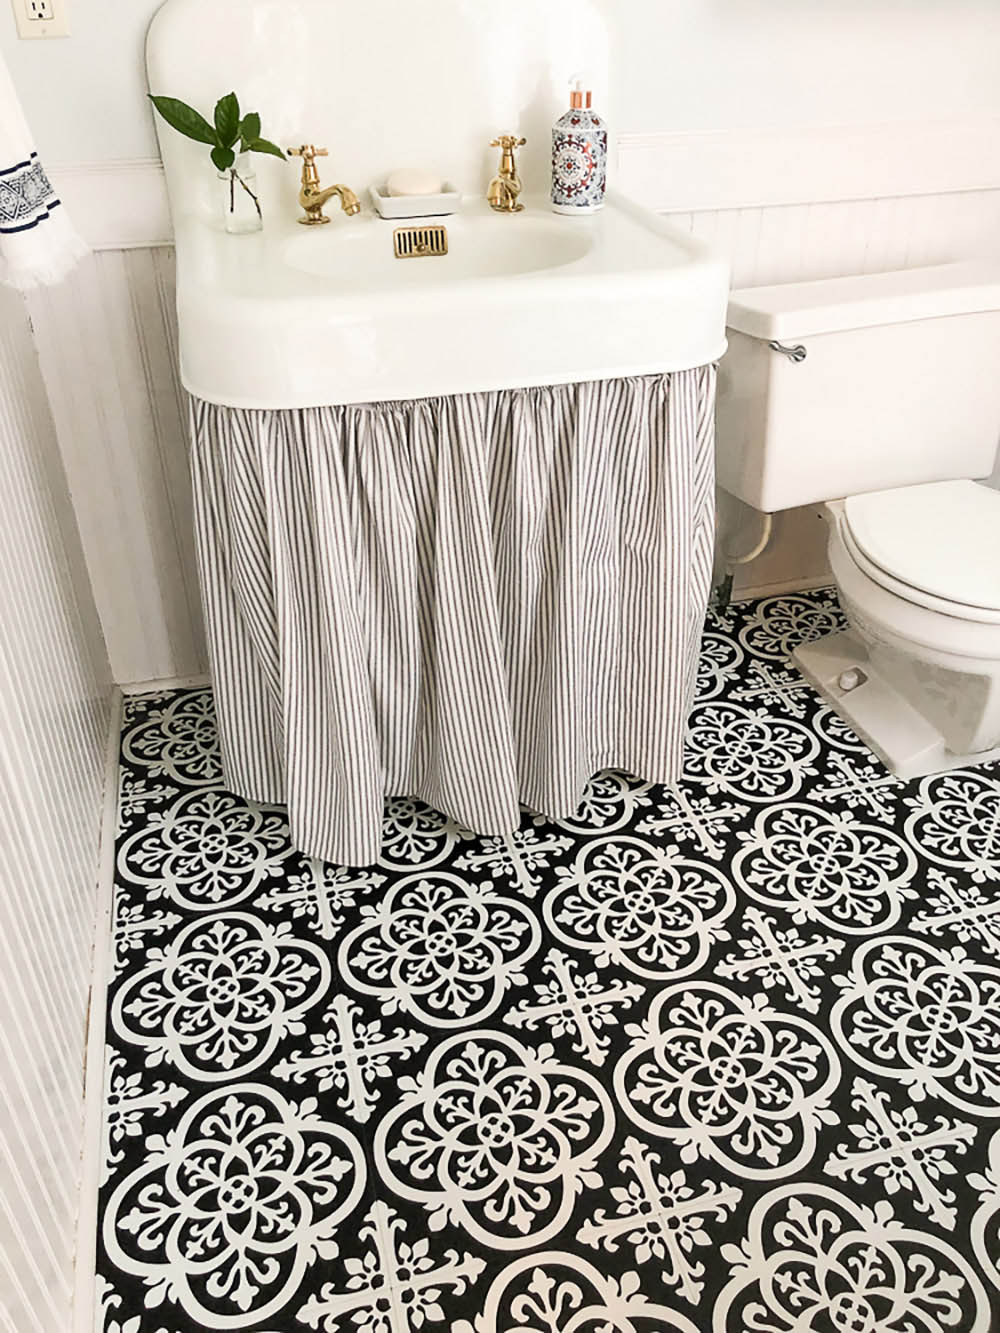 A bathroom with white and black decorative flooring and a cast-iron apron front sink.